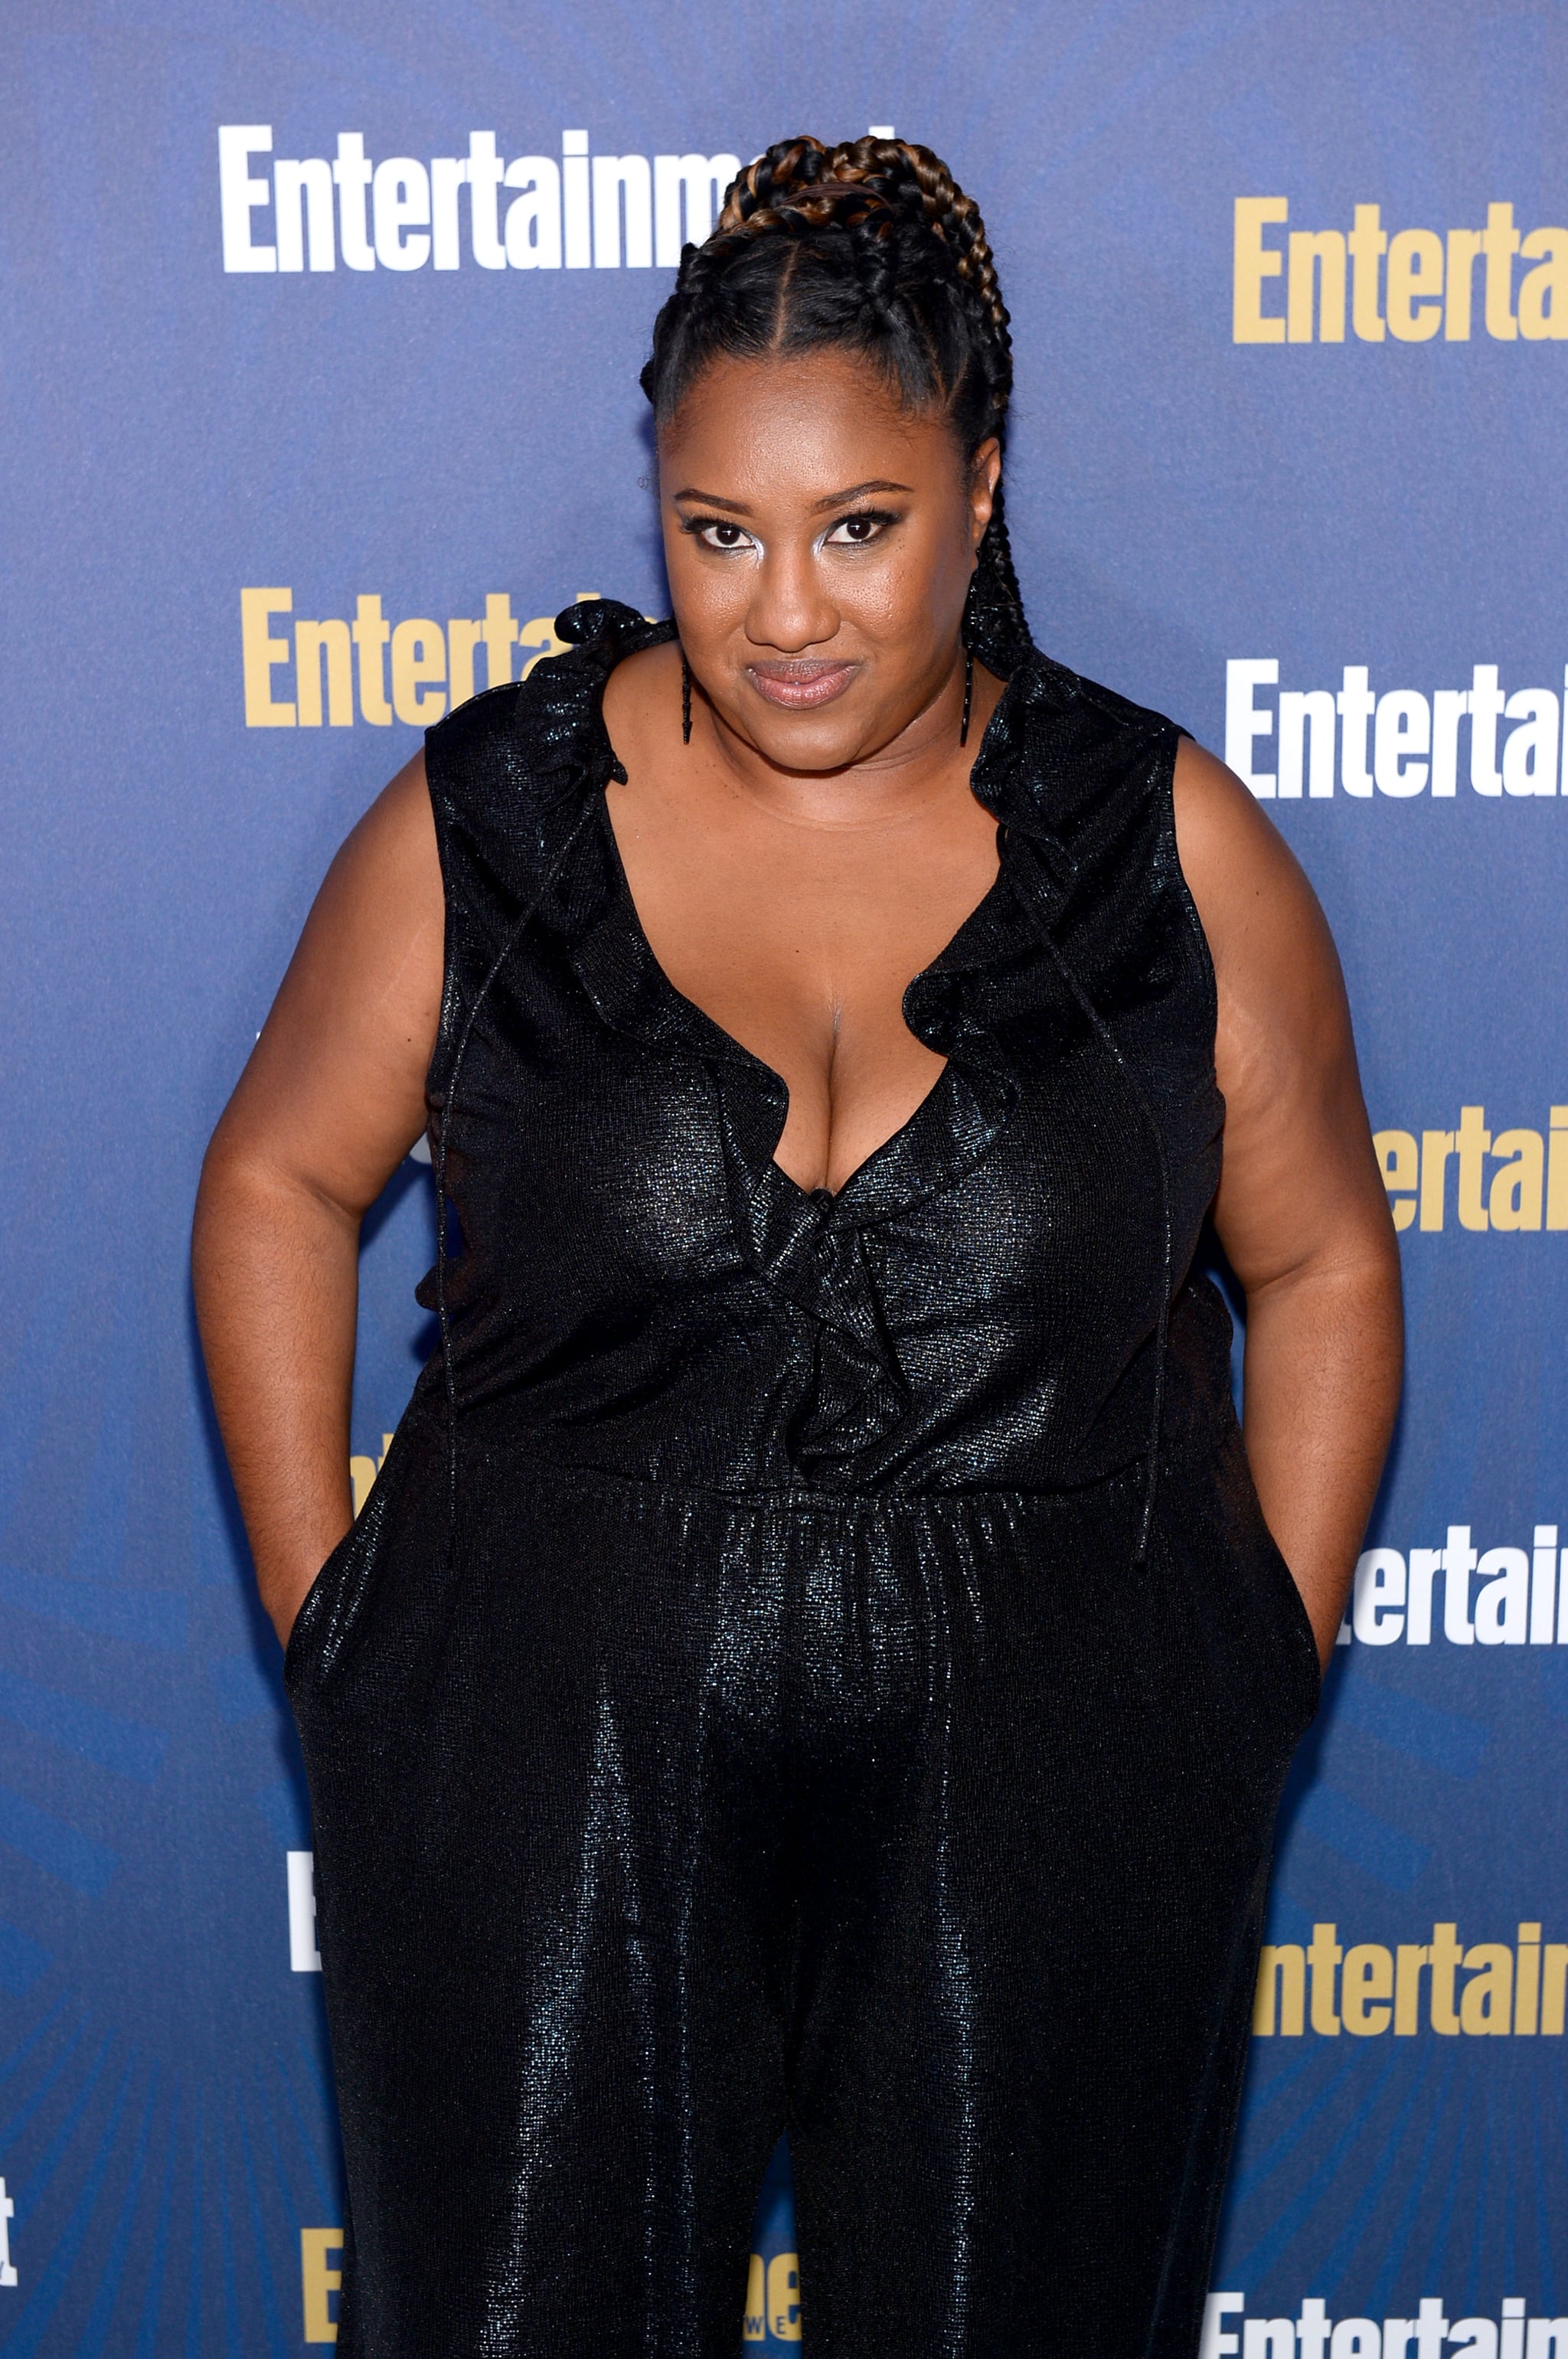 LOS ANGELES, CALIFORNIA - JANUARY 18: Ashley Nicole Black is seen as Entertainment Weekly Celebrates Screen Actors Guild Award Nominees at Chateau Marmont on January 18, 2020 in Los Angeles, California. (Photo by Andrew Toth/Getty Images for Entertainment Weekly)